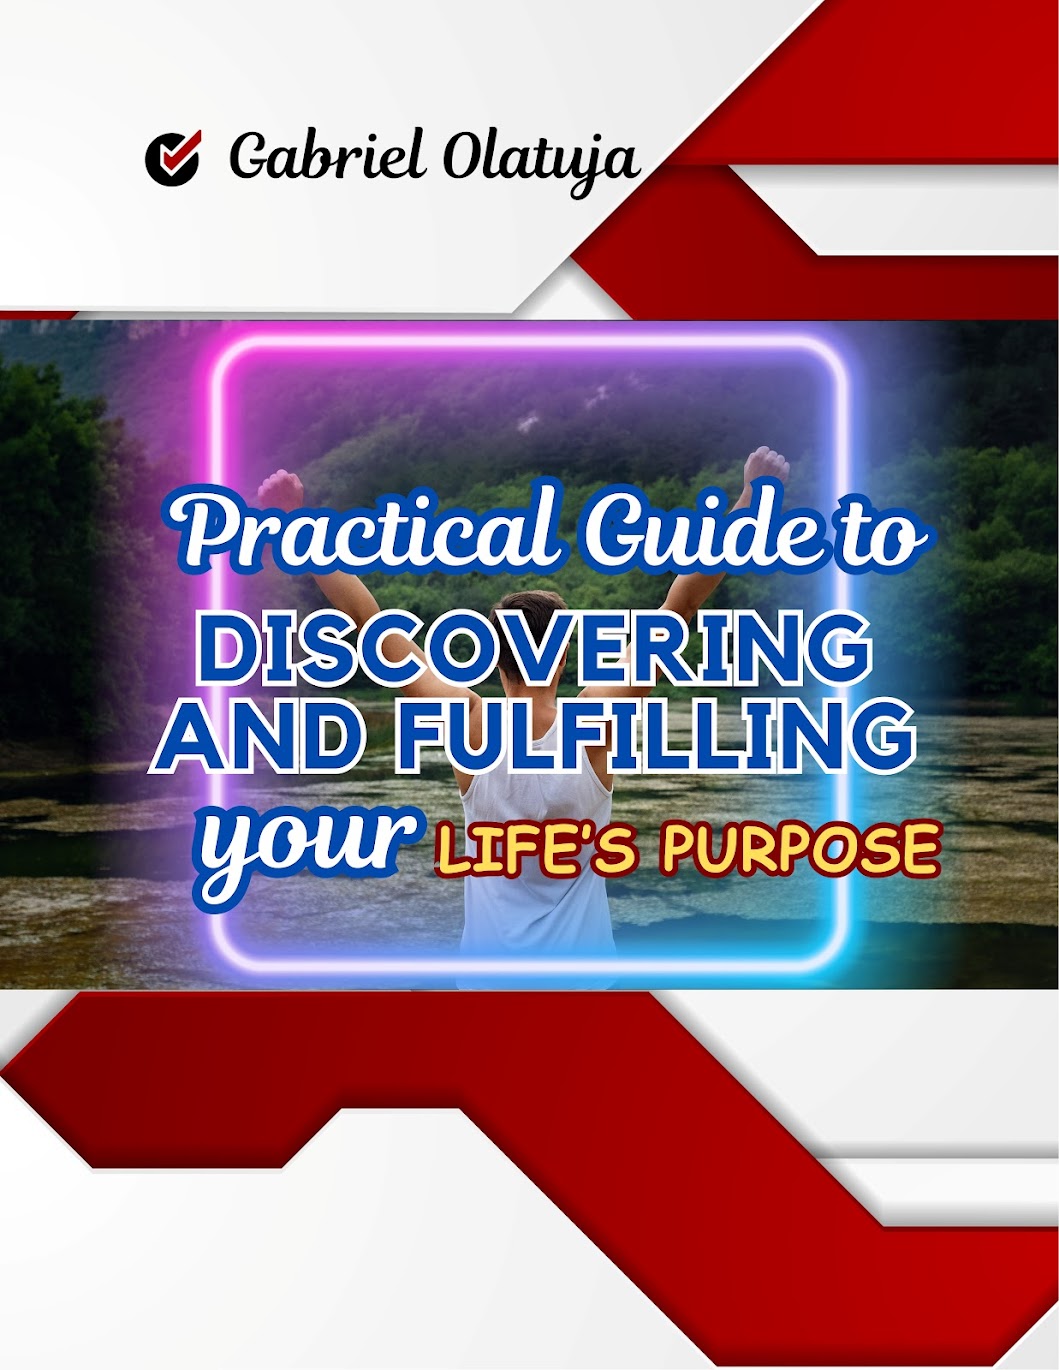 Book "Practical Guides To Discovering And Fulfilling your Life's Purpose"